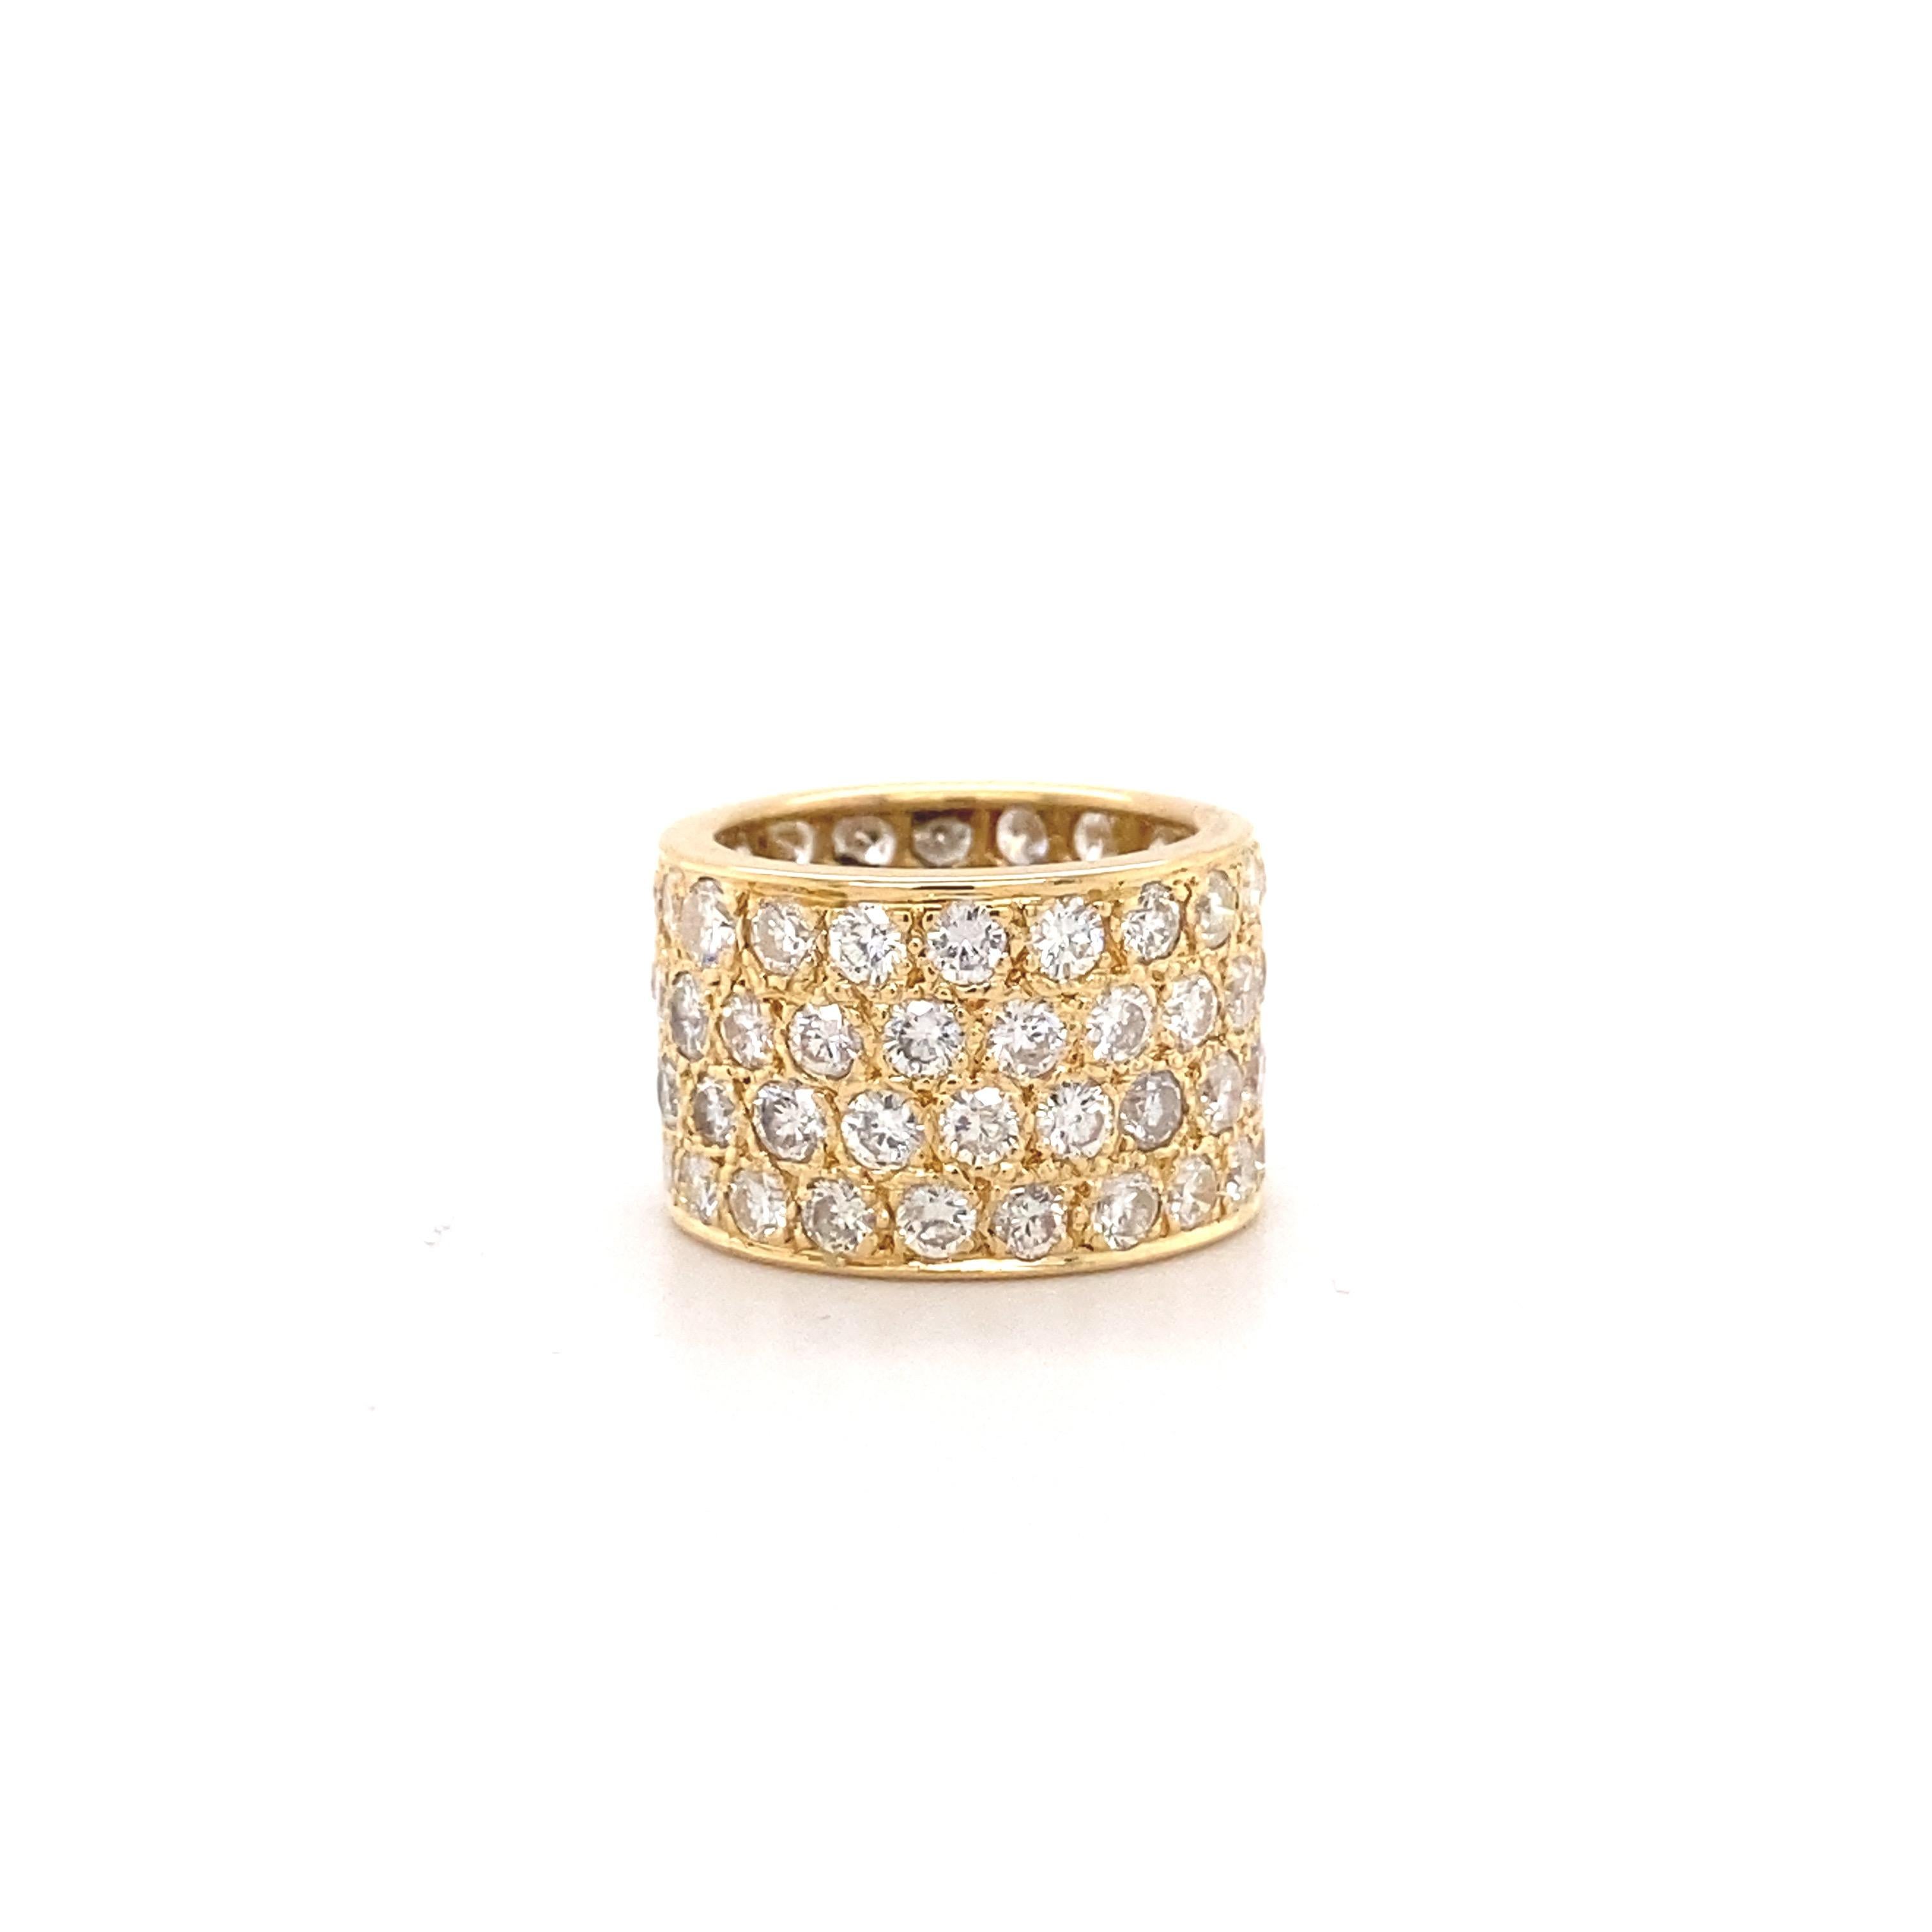 6 Carat Round Diamond Four-Row Eternity Band Ring in 14 Karat Yellow Gold For Sale 3